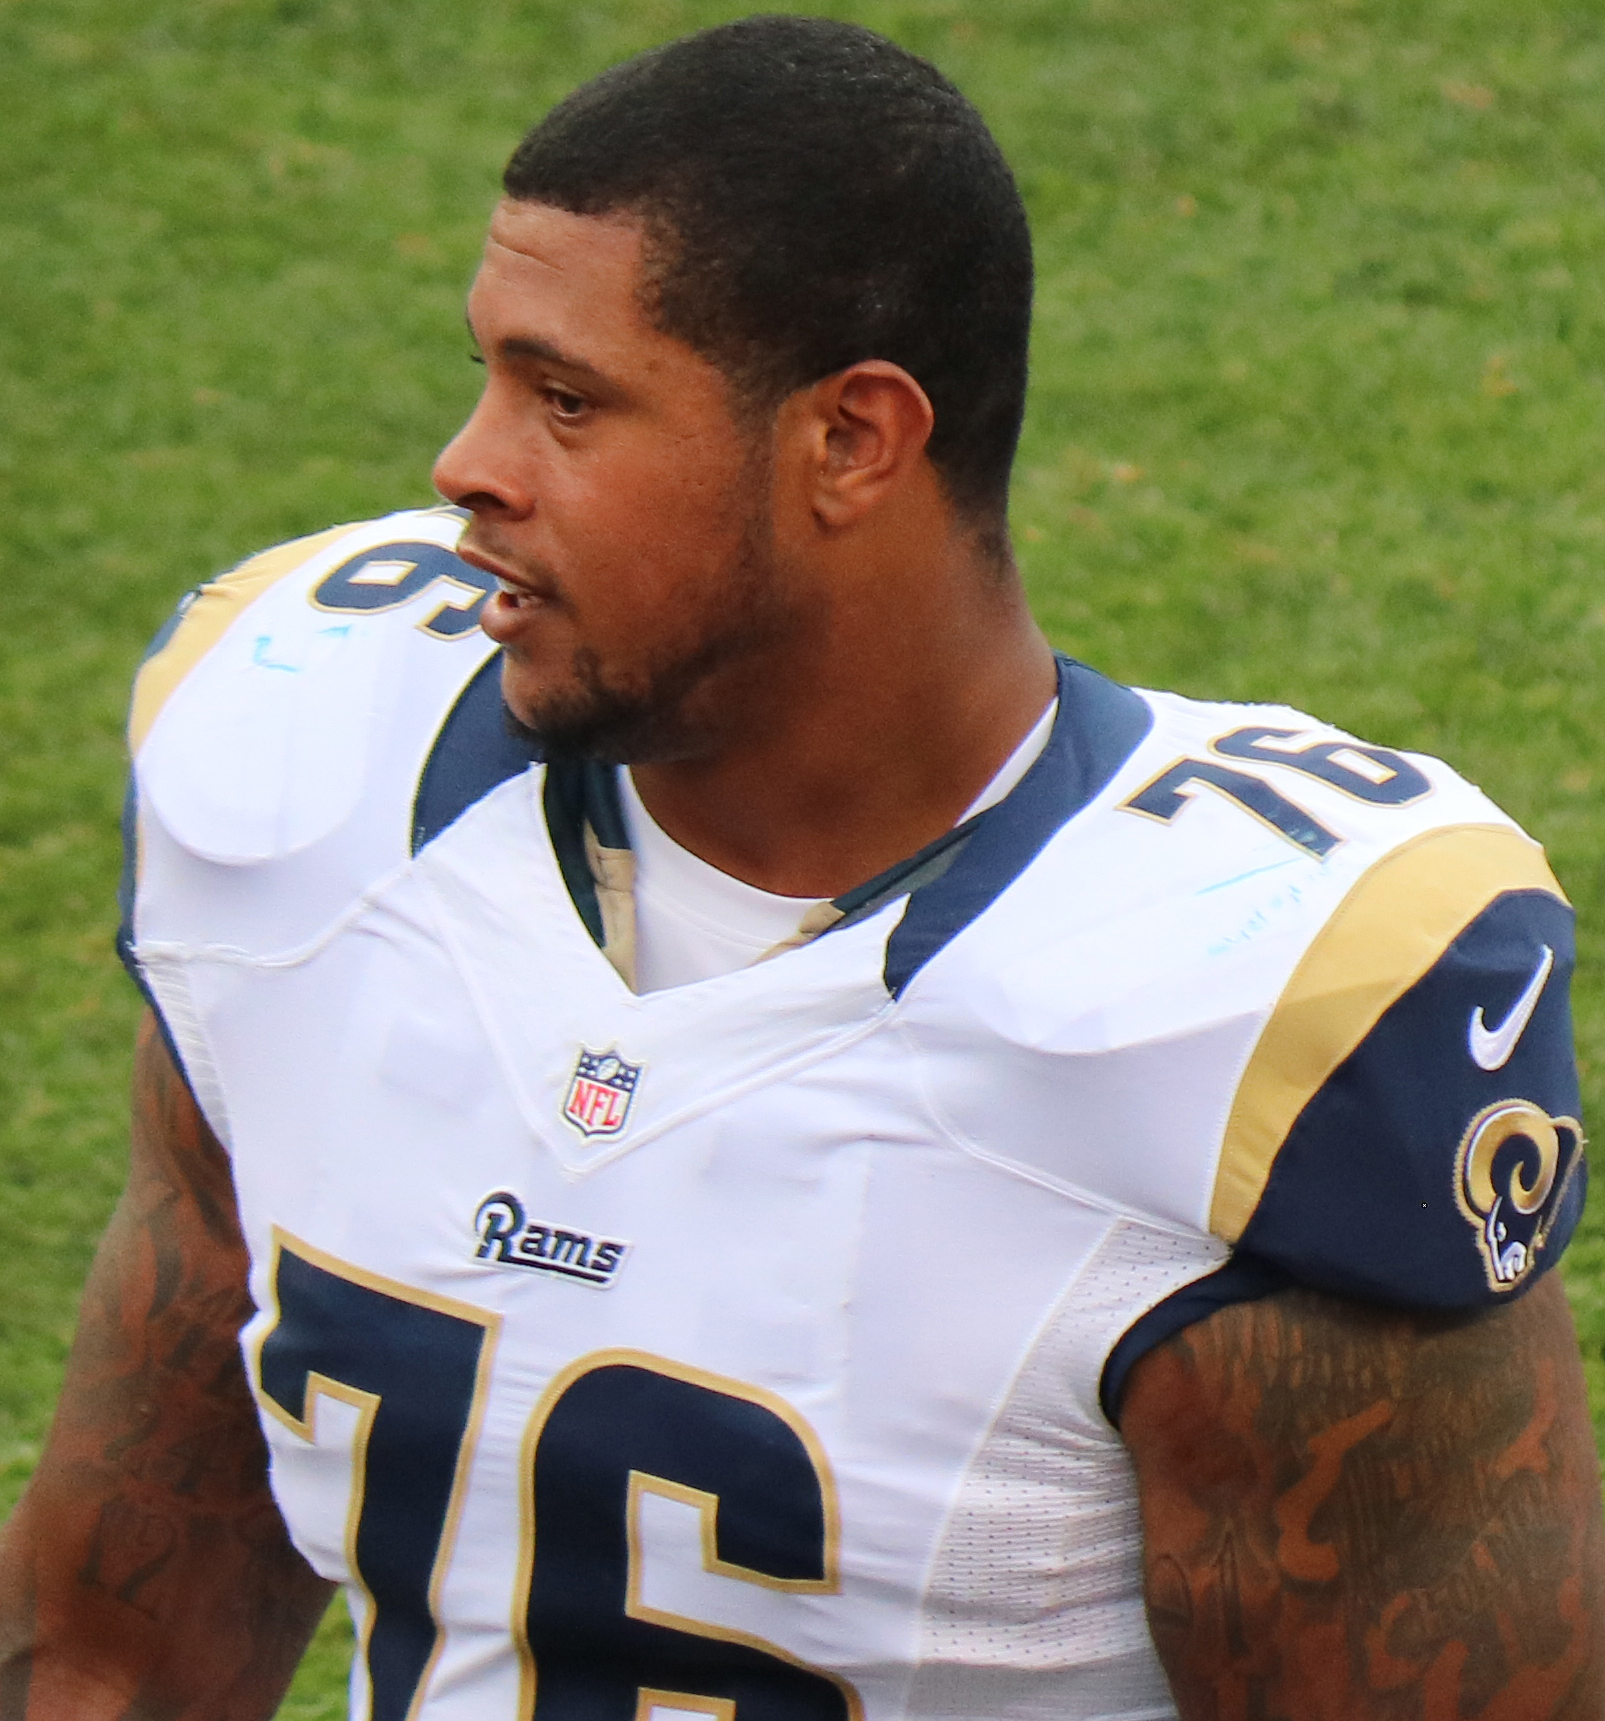 Titans to sign Saffold to 4-year deal worth $44M